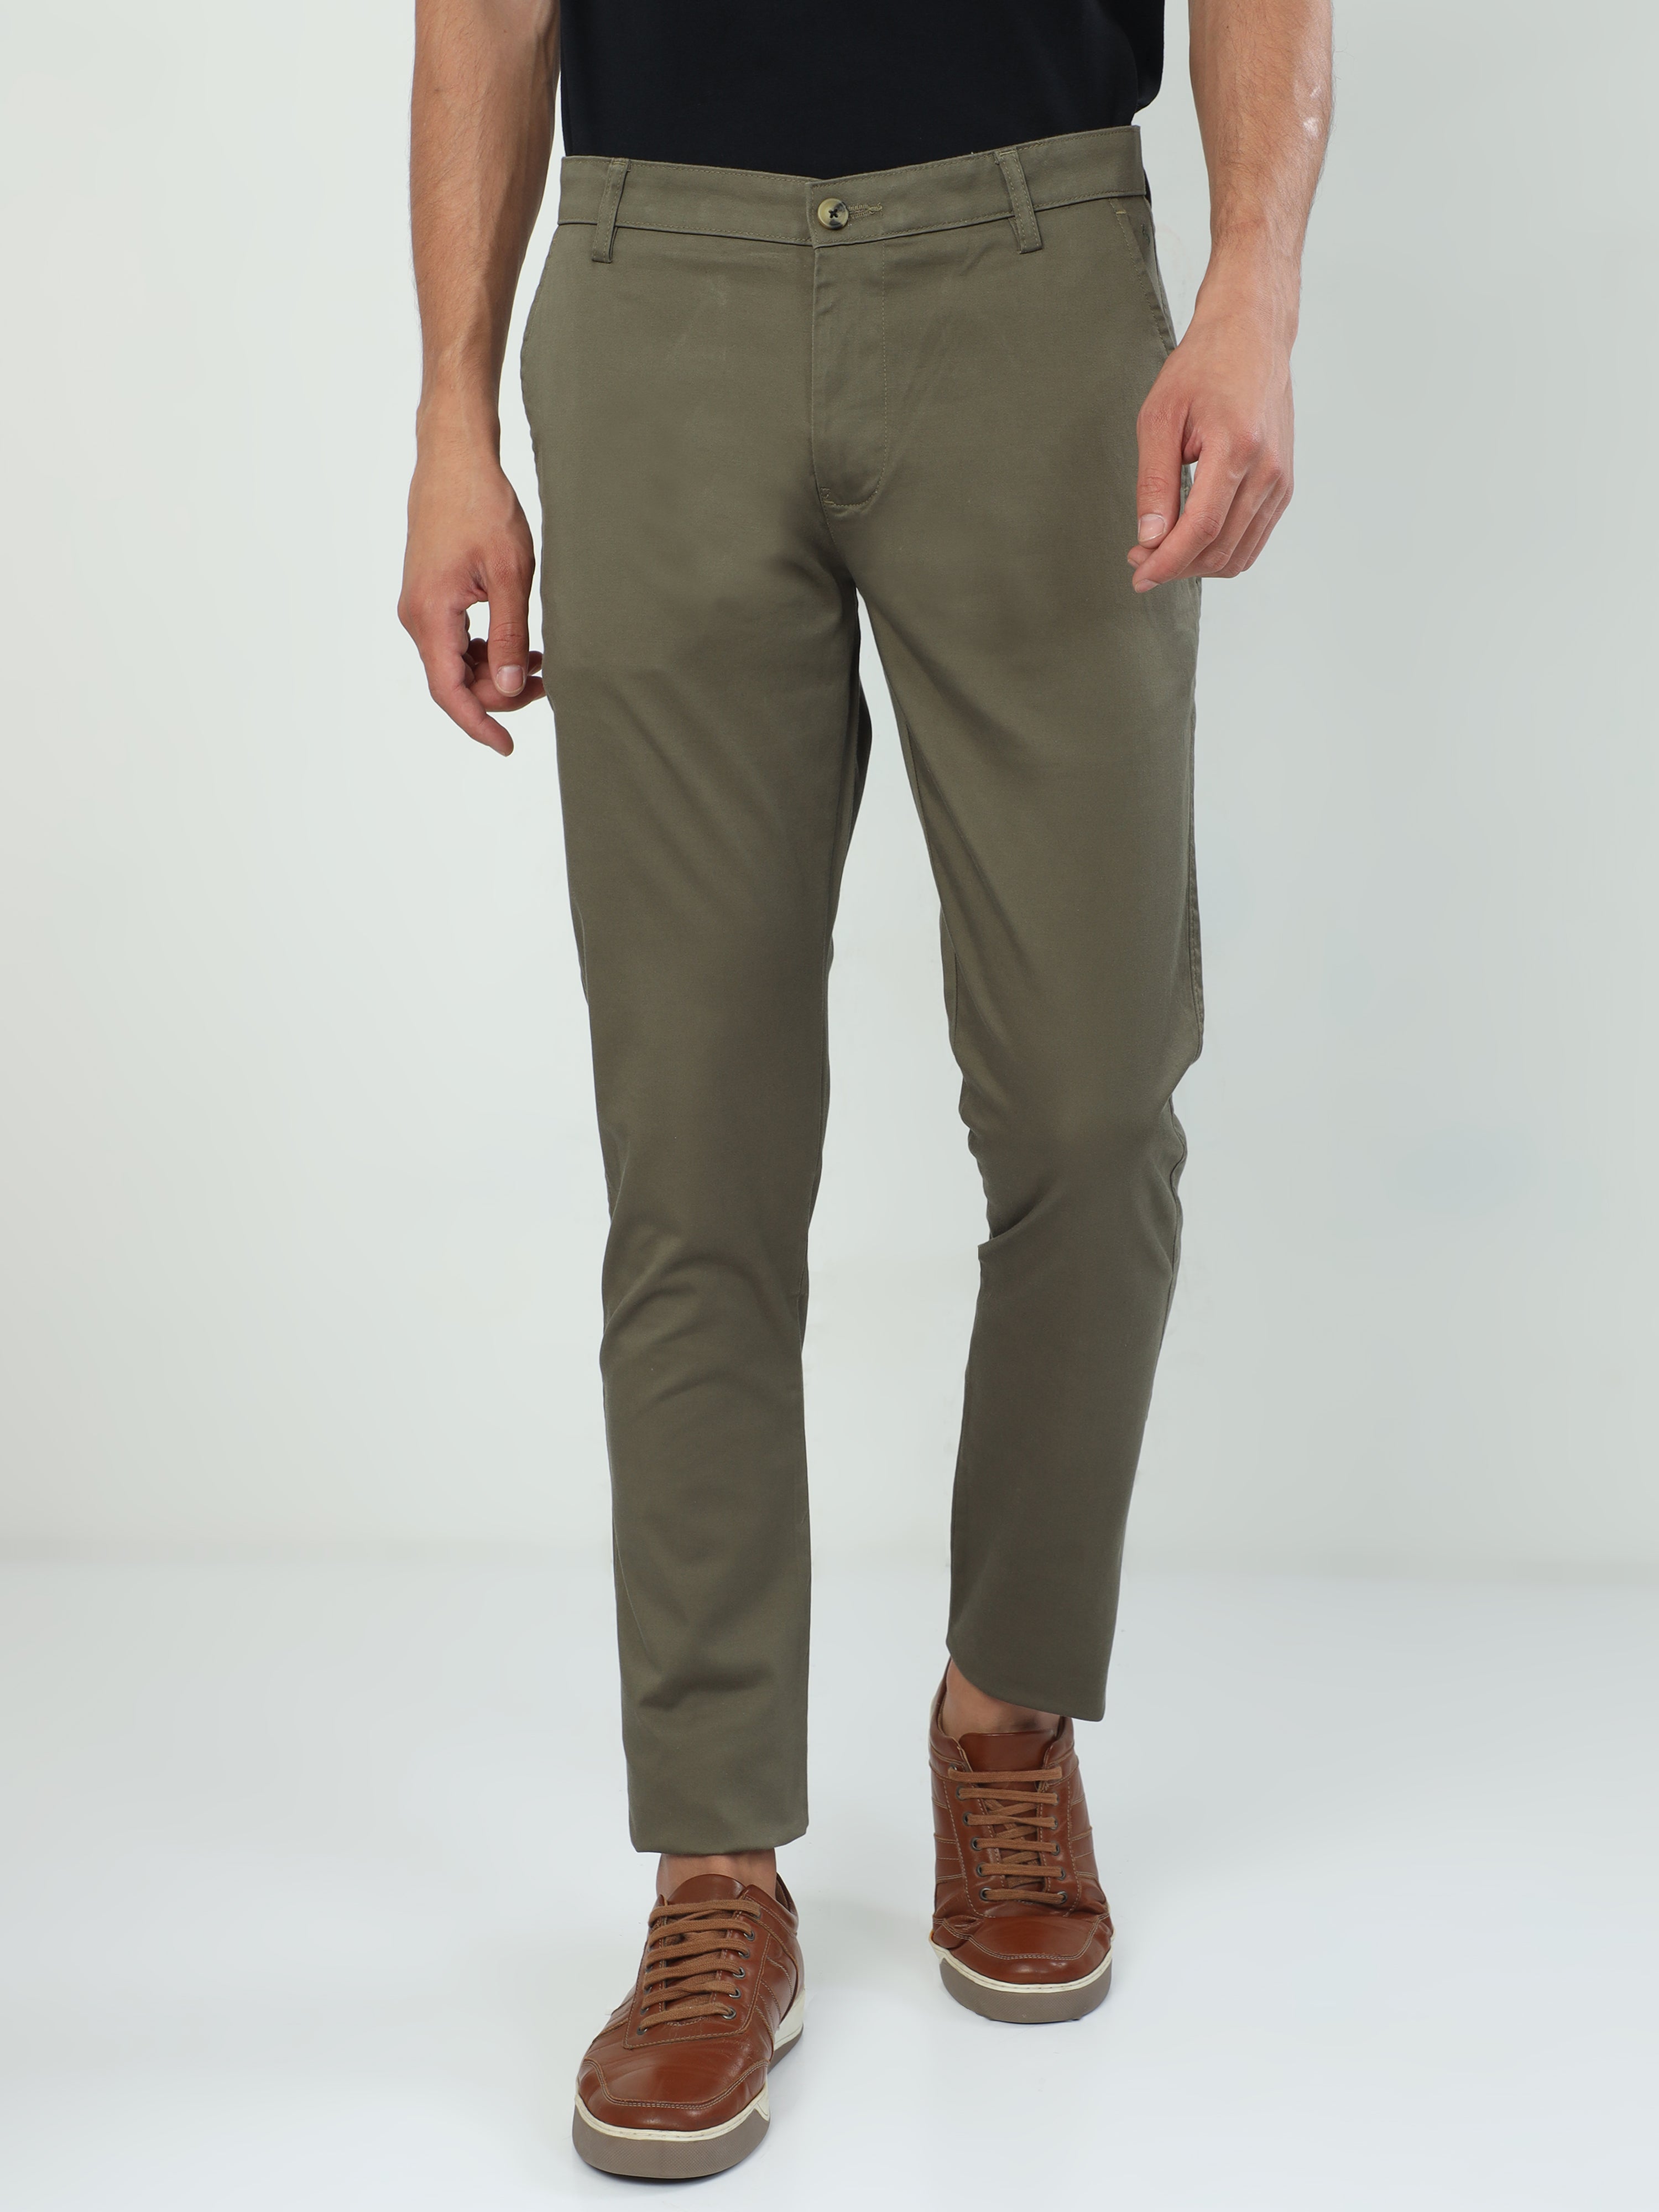 Buy Olive Green Trousers & Pants for Men by Truser Online | Ajio.com